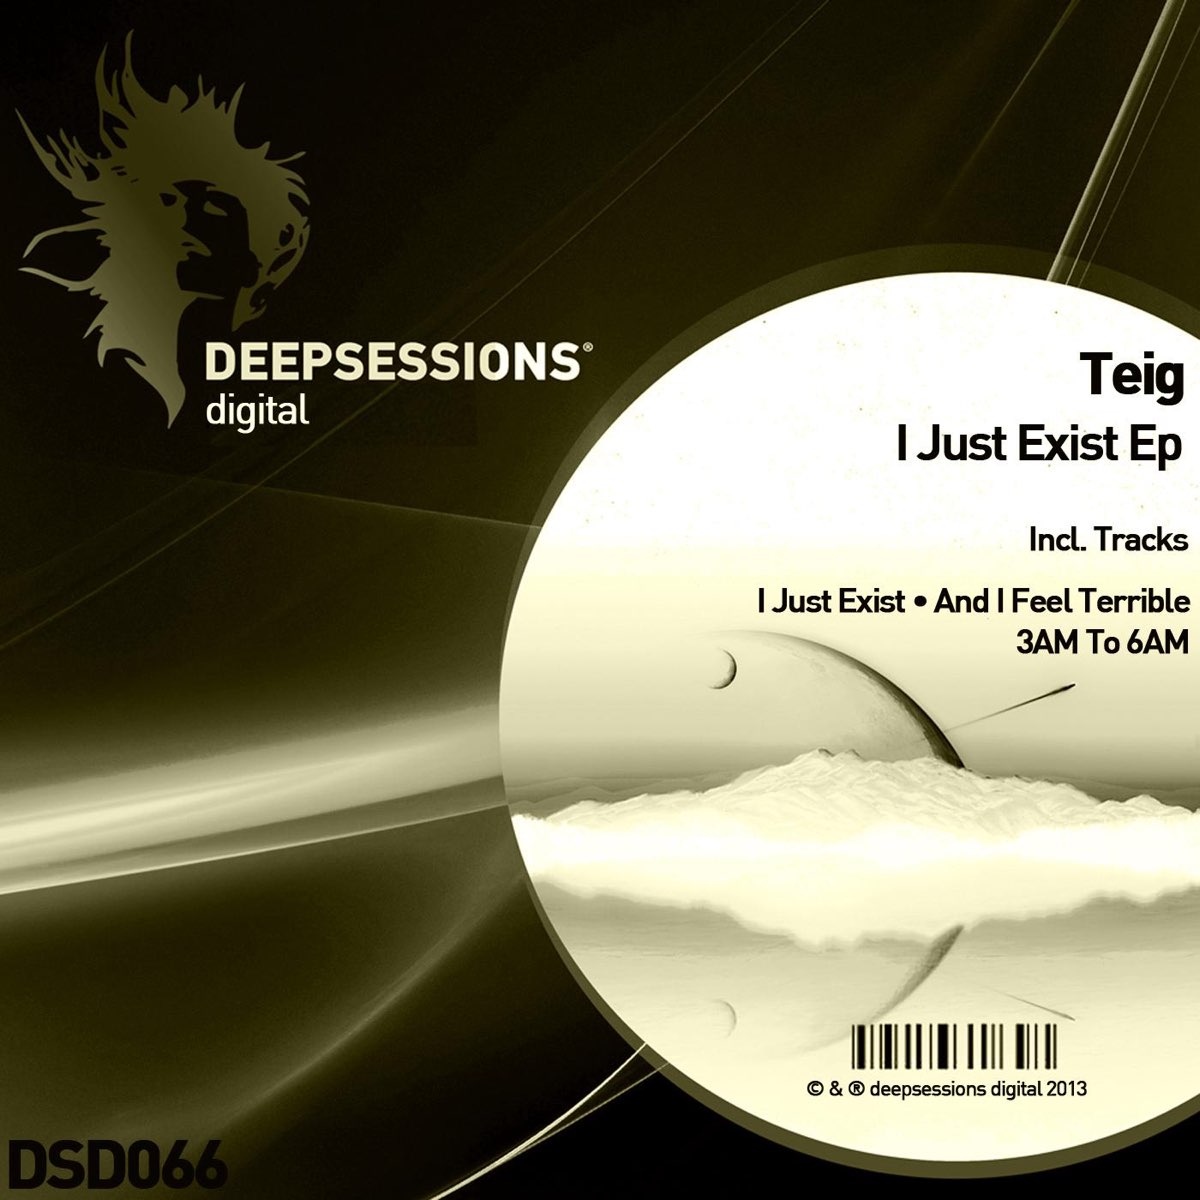 Just existing. Deepsessions recordings. Just exist. Midnight Secrets. Only one Life.